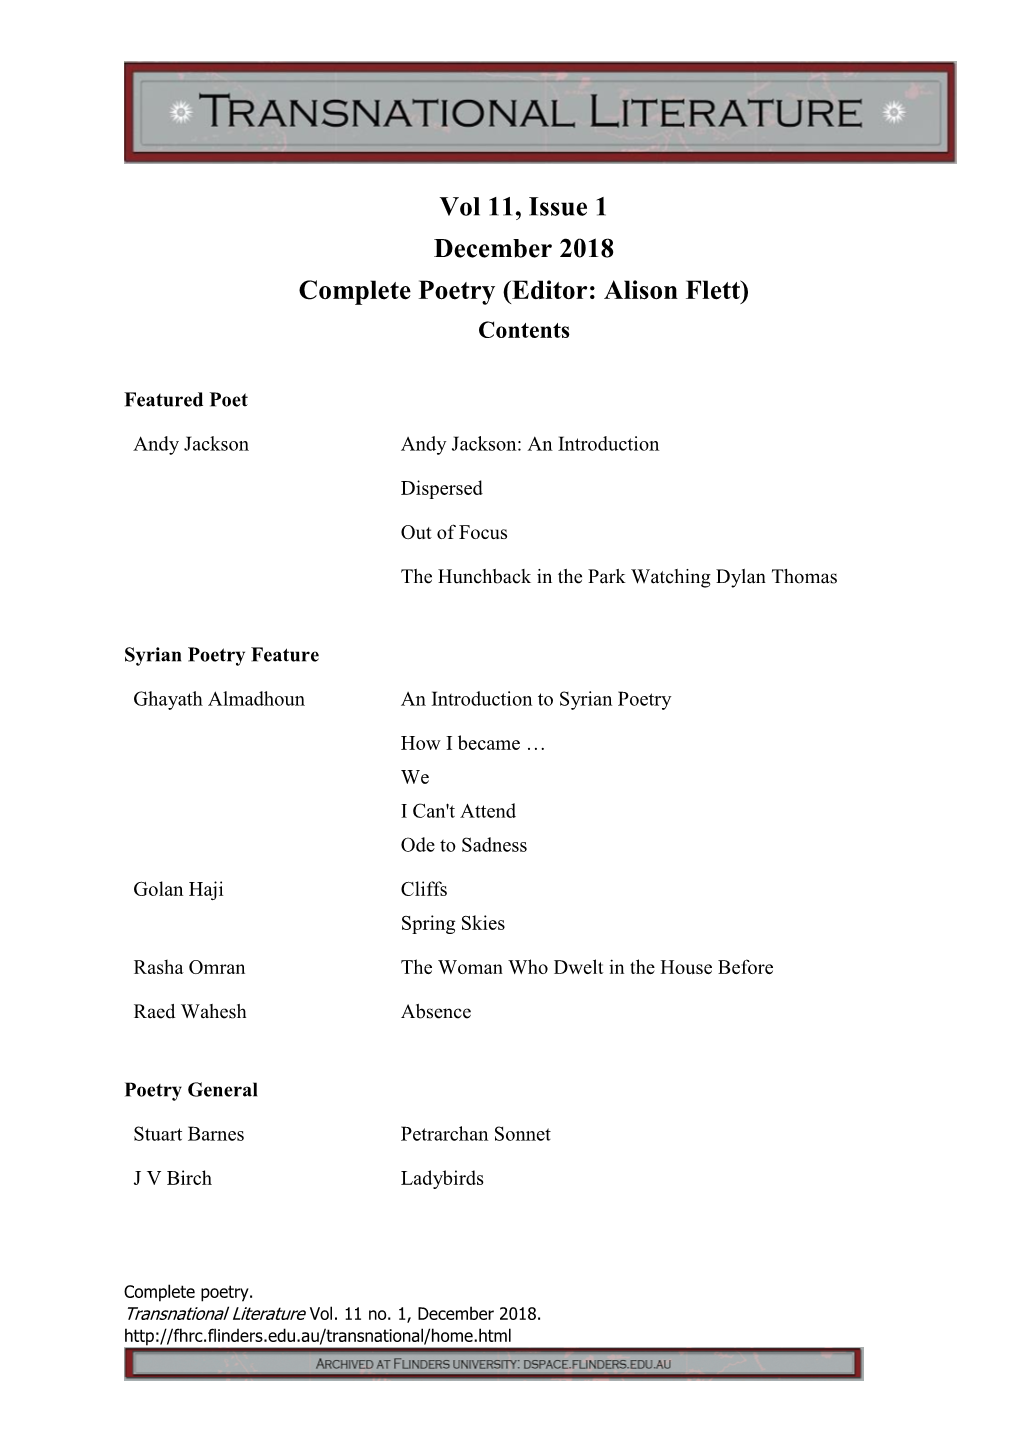 Vol 11, Issue 1 December 2018 Complete Poetry (Editor: Alison Flett) Contents